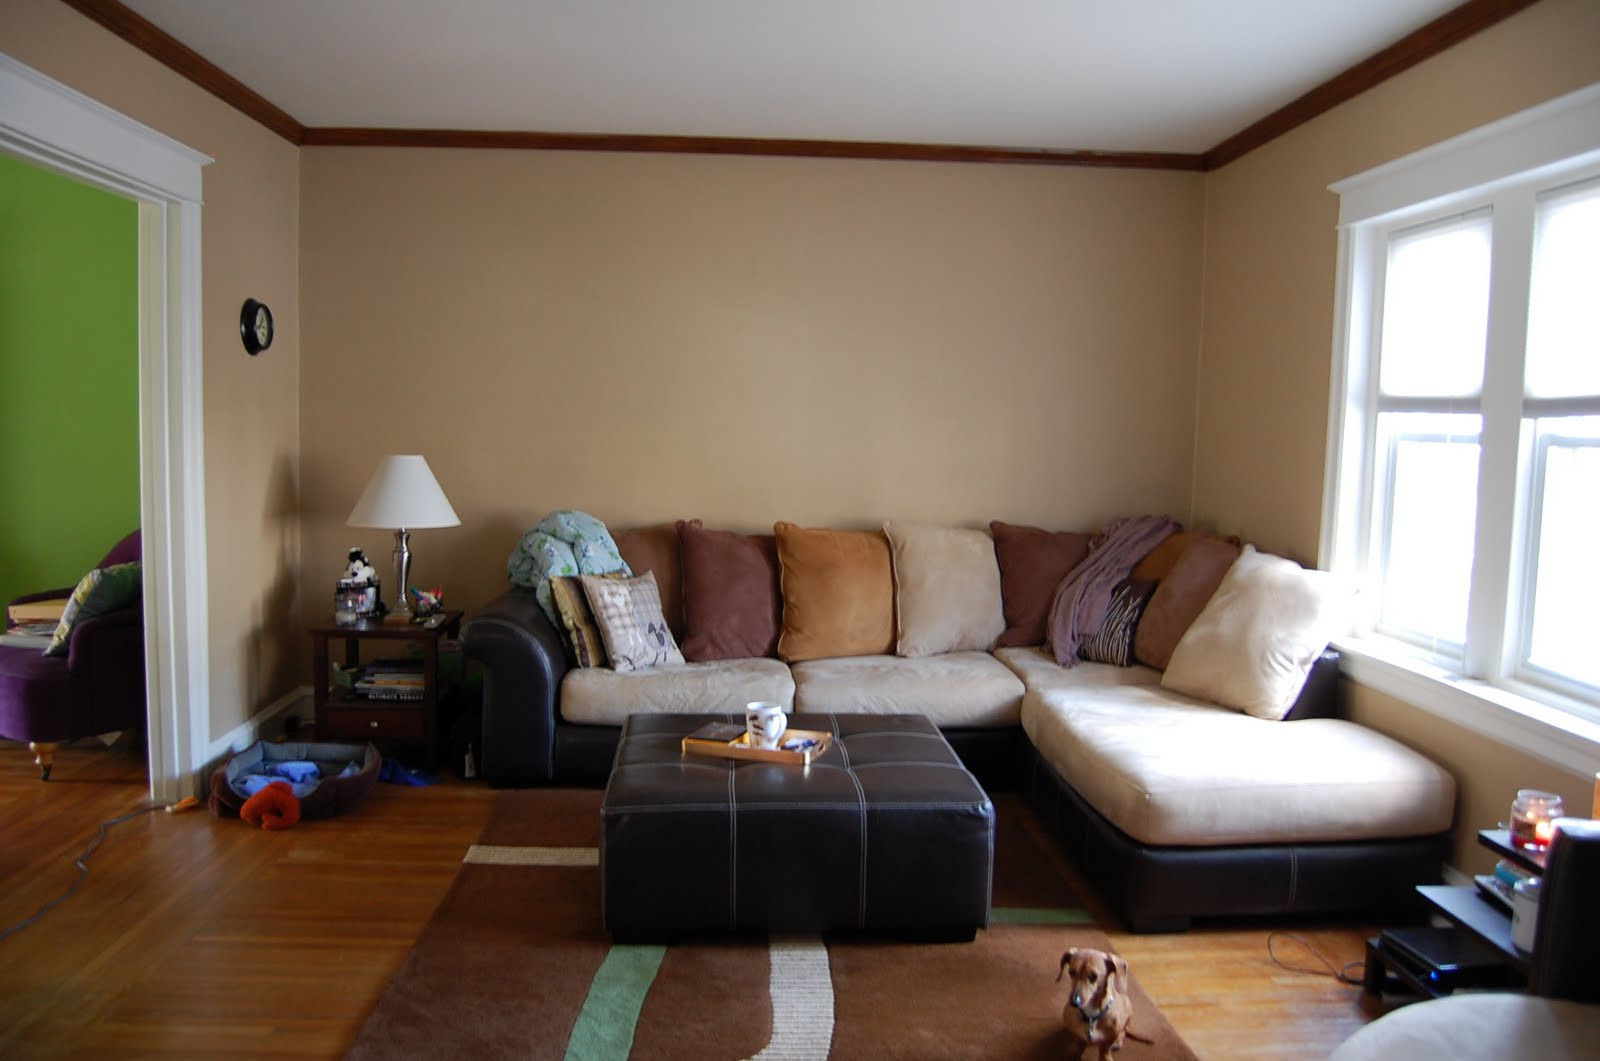 Wall Pictures For Living Room
 Tempest in a Blue Teapot Living room help needed